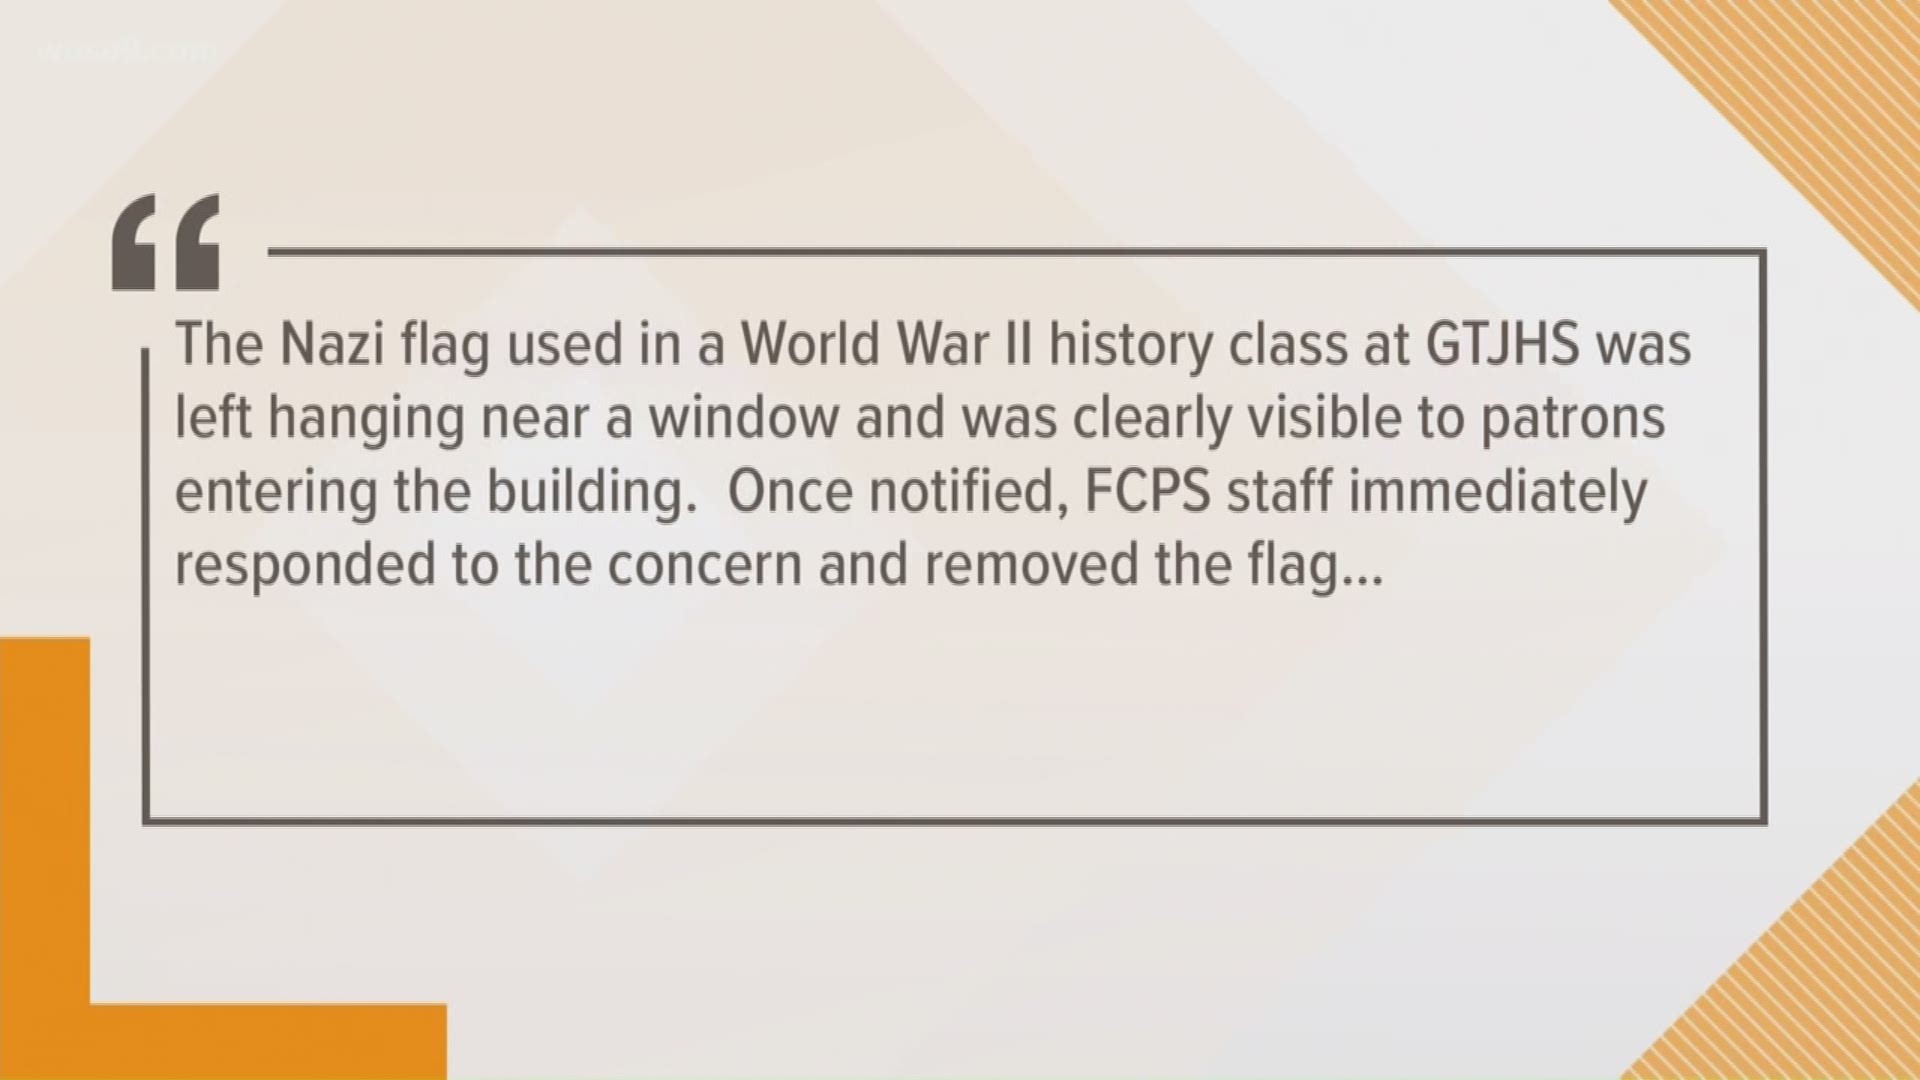 Frederick Co. Public Schools superintendent Theresa R. Alban said in a statement that the flag was used in a World War II history class and was left visible.